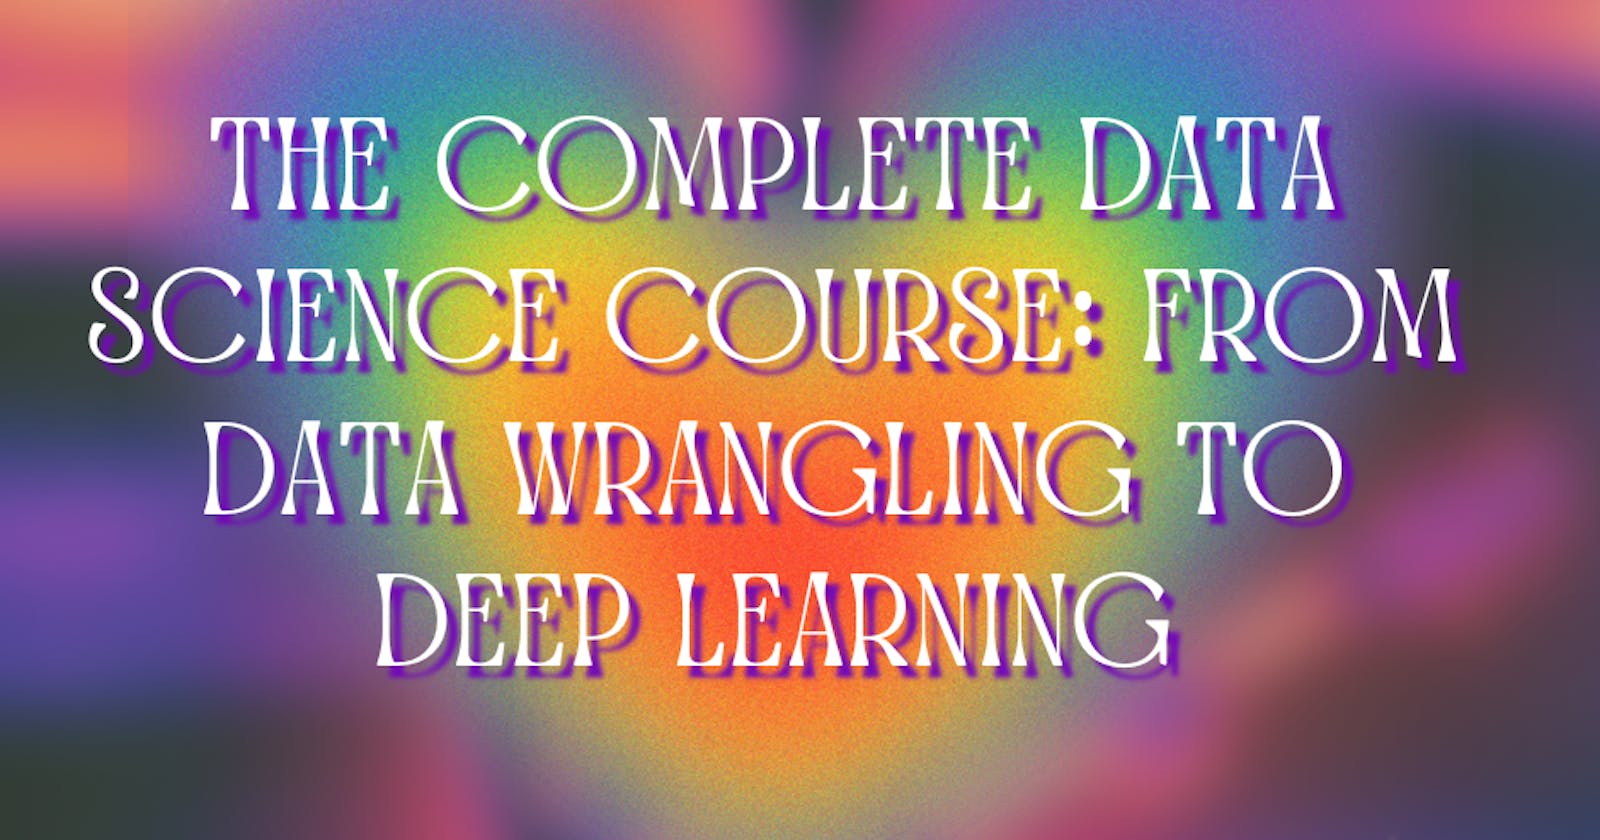 The Complete Data Science Course: From Data Wrangling to Deep Learning